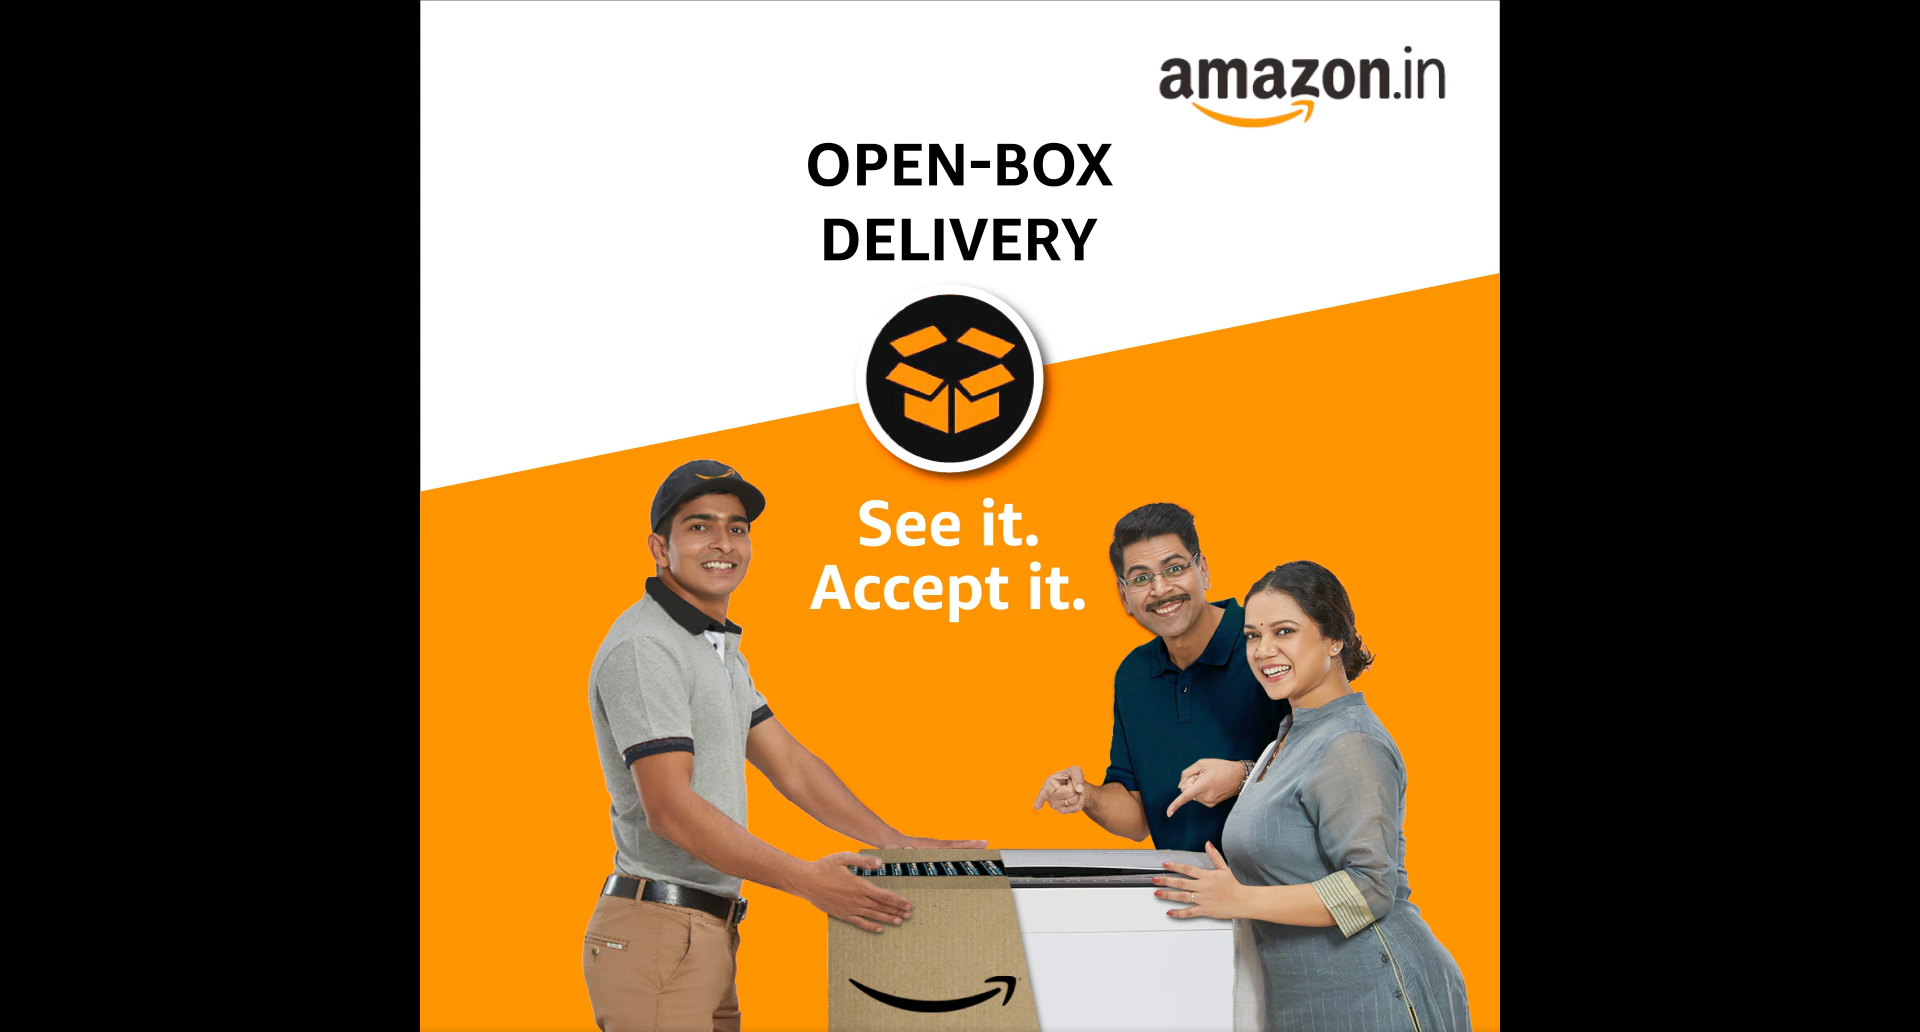 Order. Check. Accept. With Open-box Delivery on #ApniDukaan